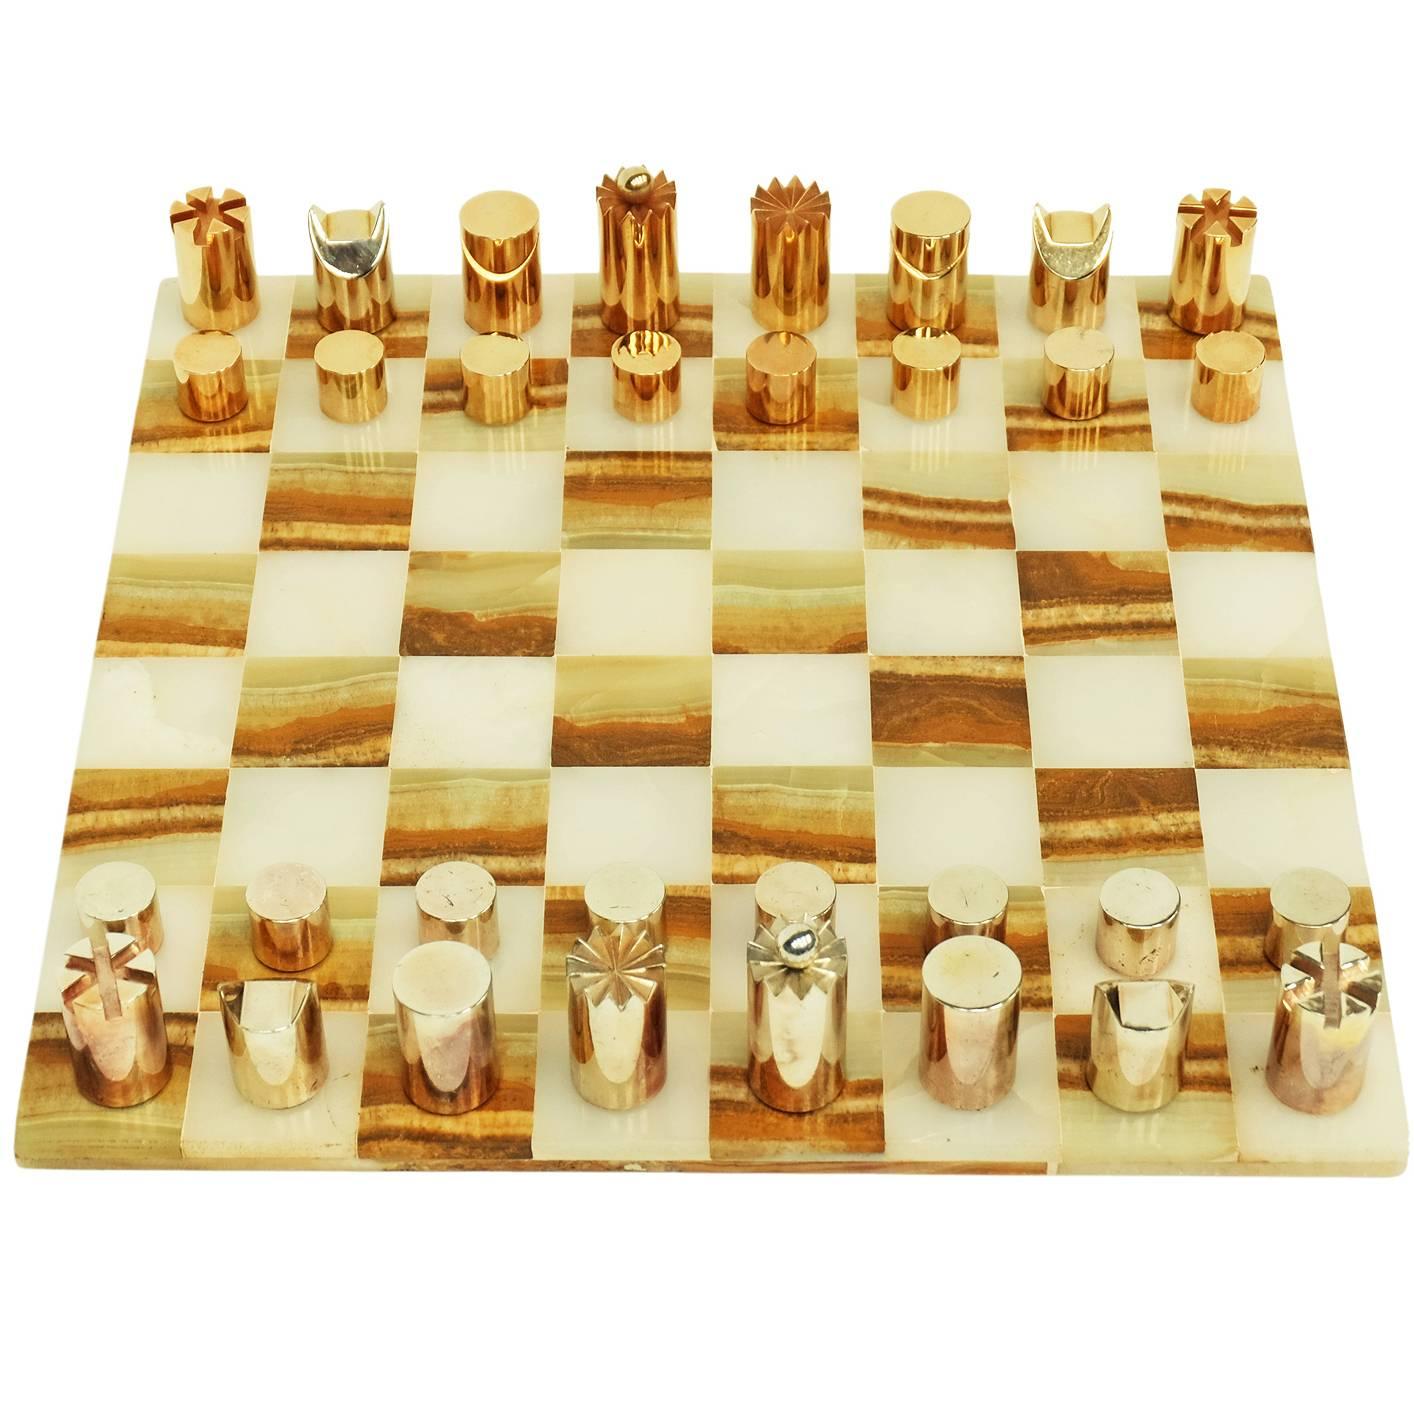 1970s Modernist Chess Set Onyx Board Gold Steel Pieces